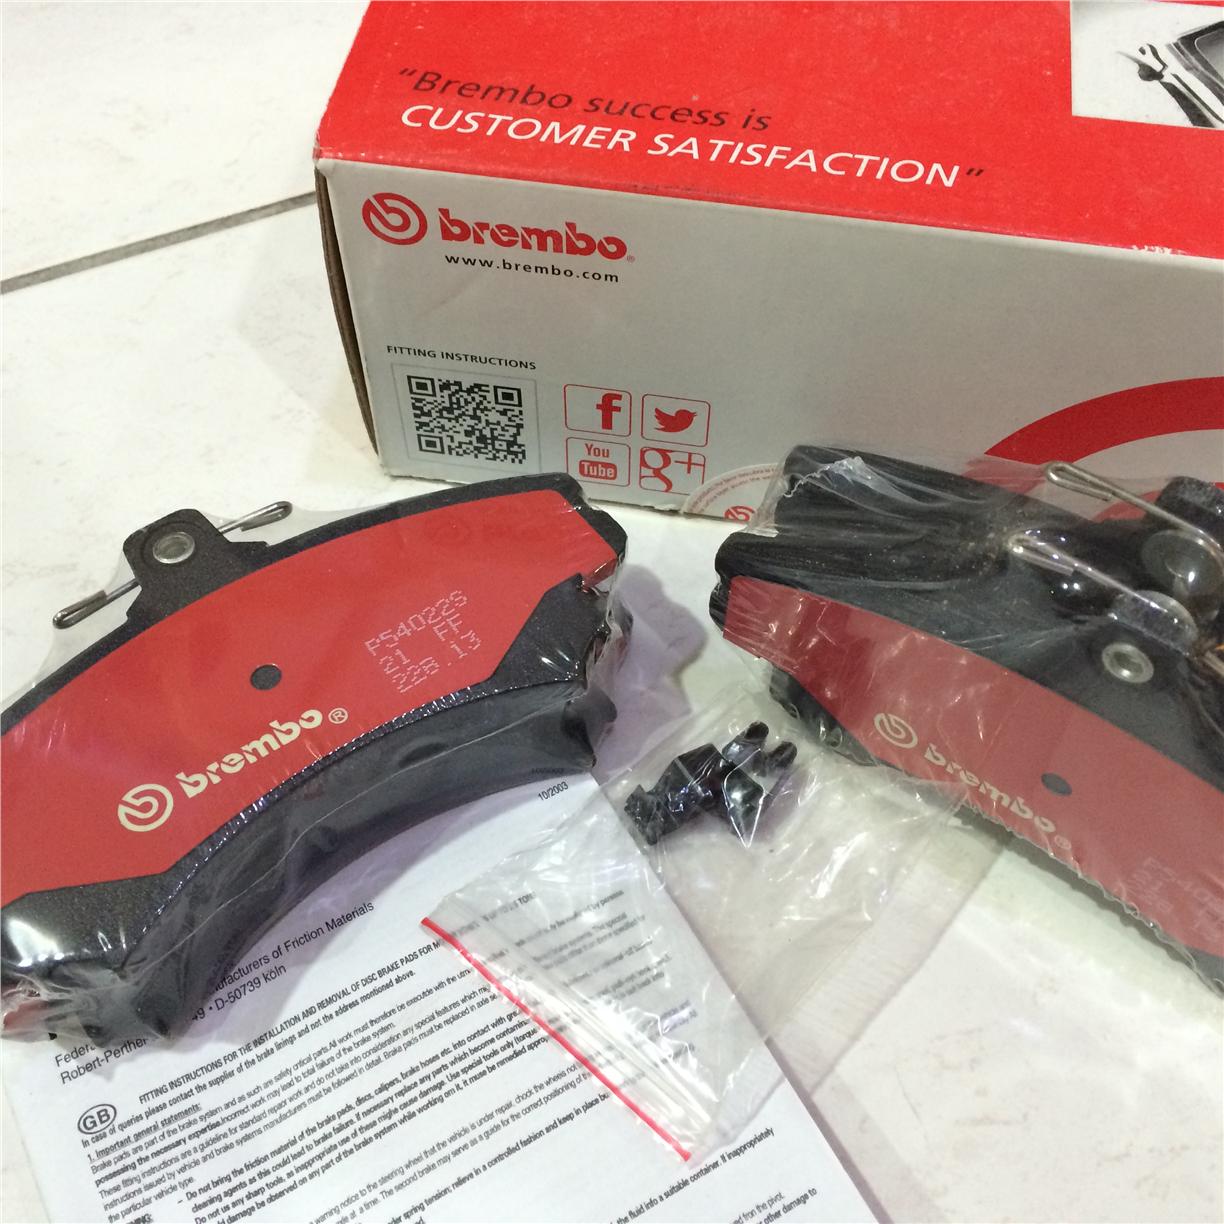 GENUINE BREMBO FRONT BRAKE PAD for P (end 4/8/2018 12:20 PM)